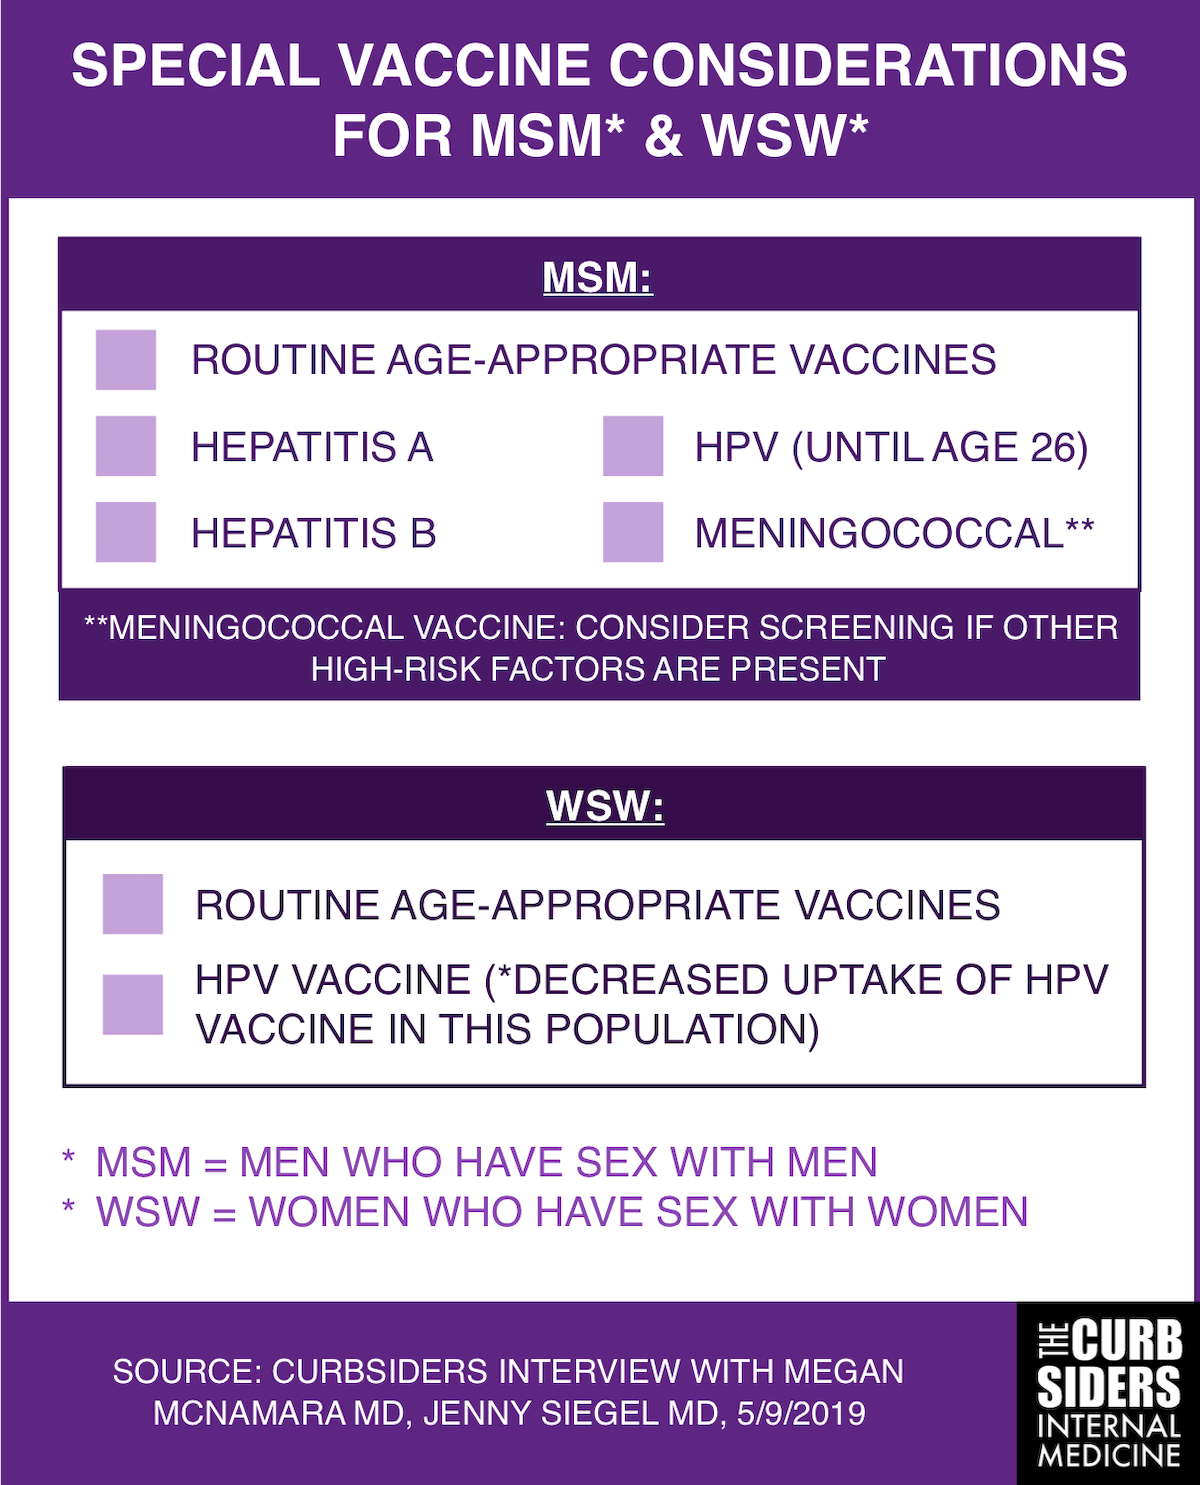 Special Vaccine Considerations for MSM* & WSW*
